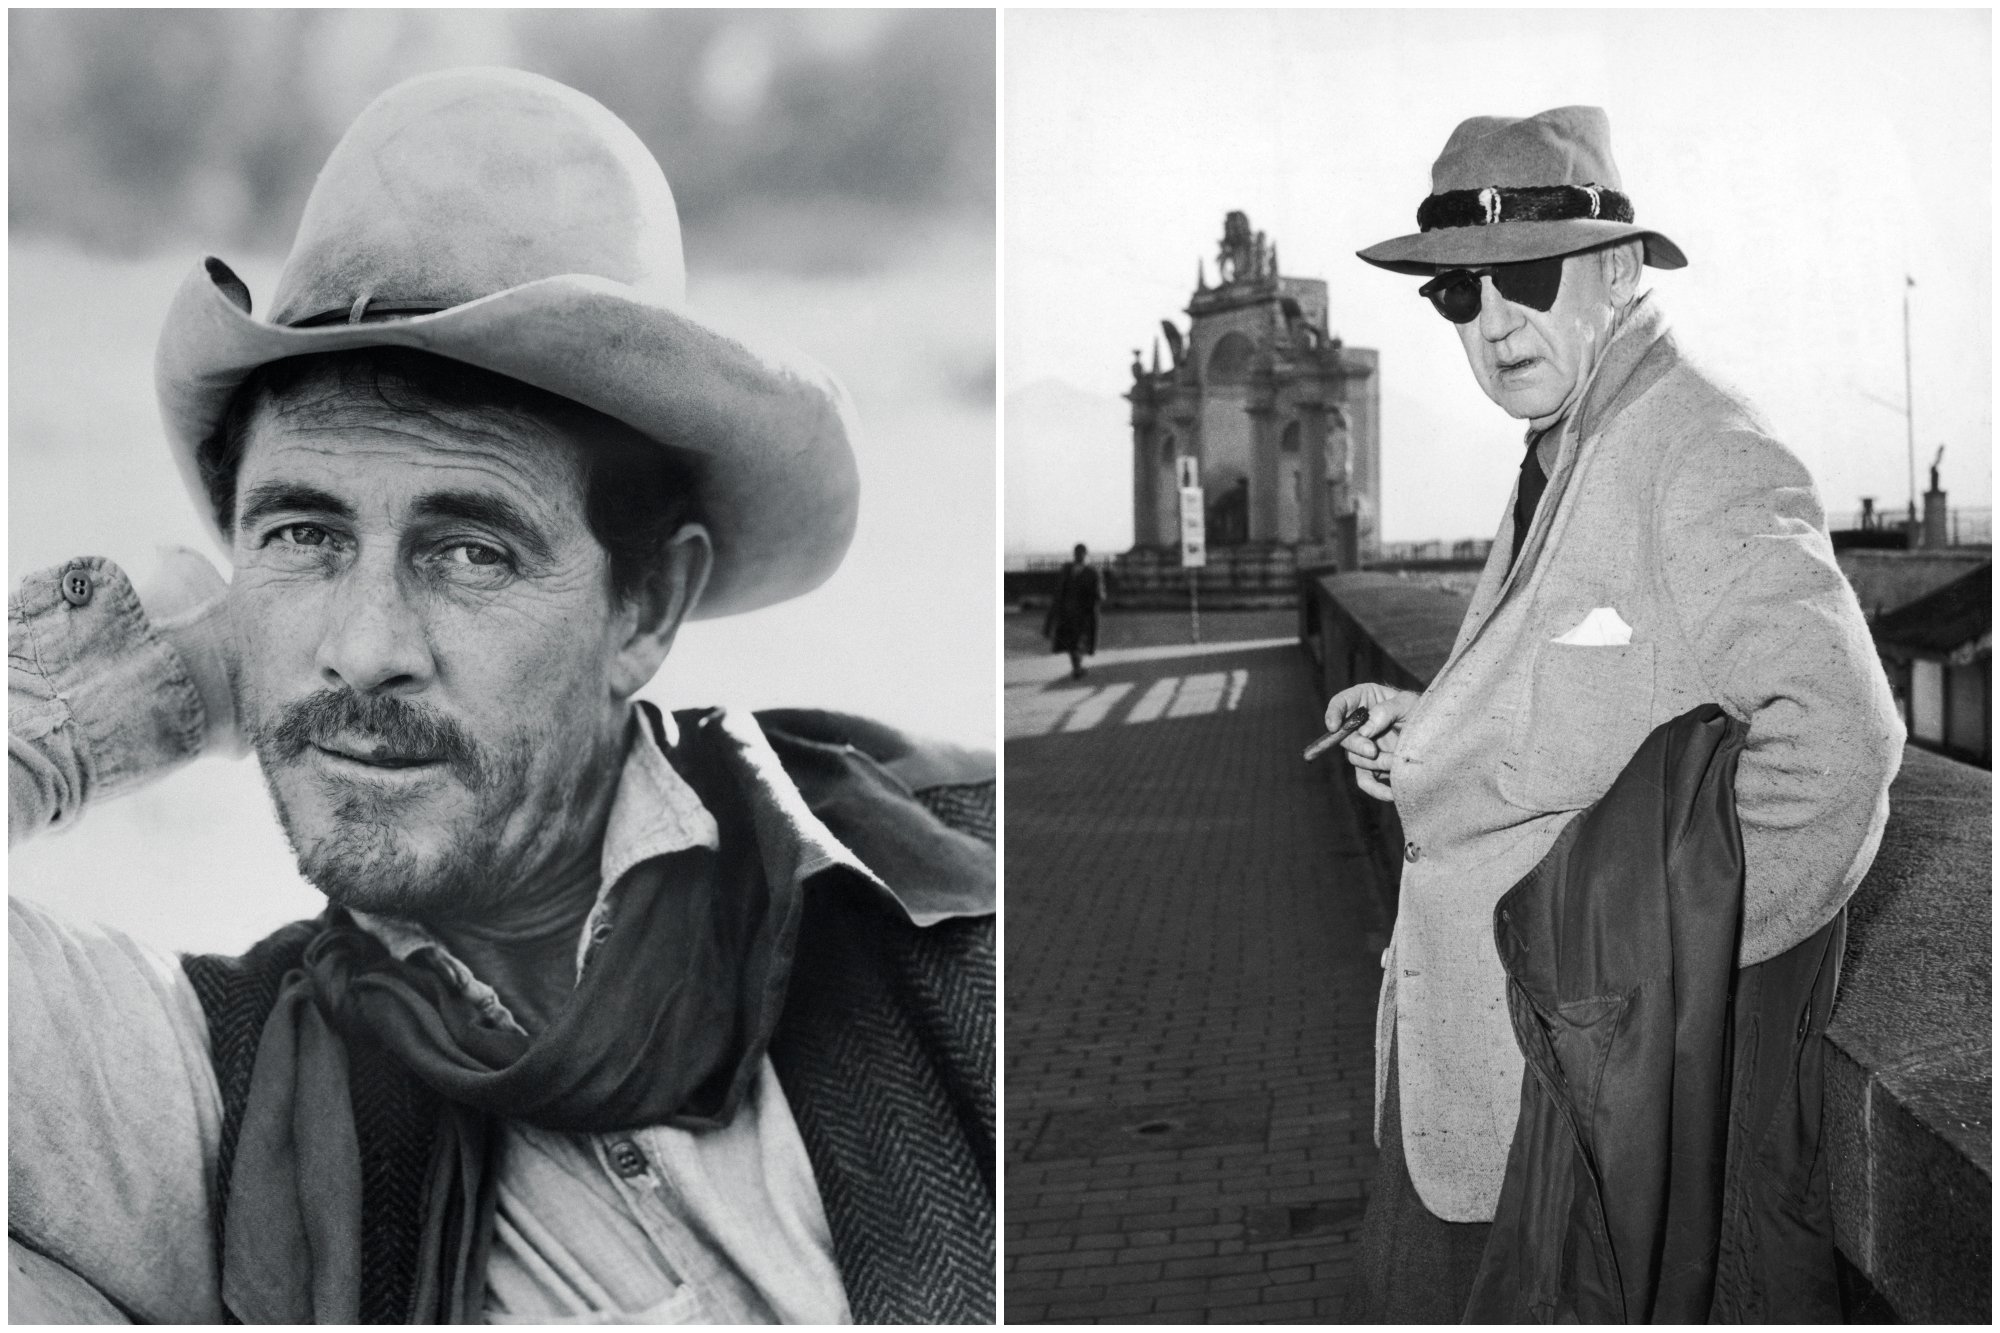 Ken Curtis and John Ford. Curtis is wearing a Western outfit with his hand behind his head. Ford is wearing a coat and holding a cigar, looking off to the side